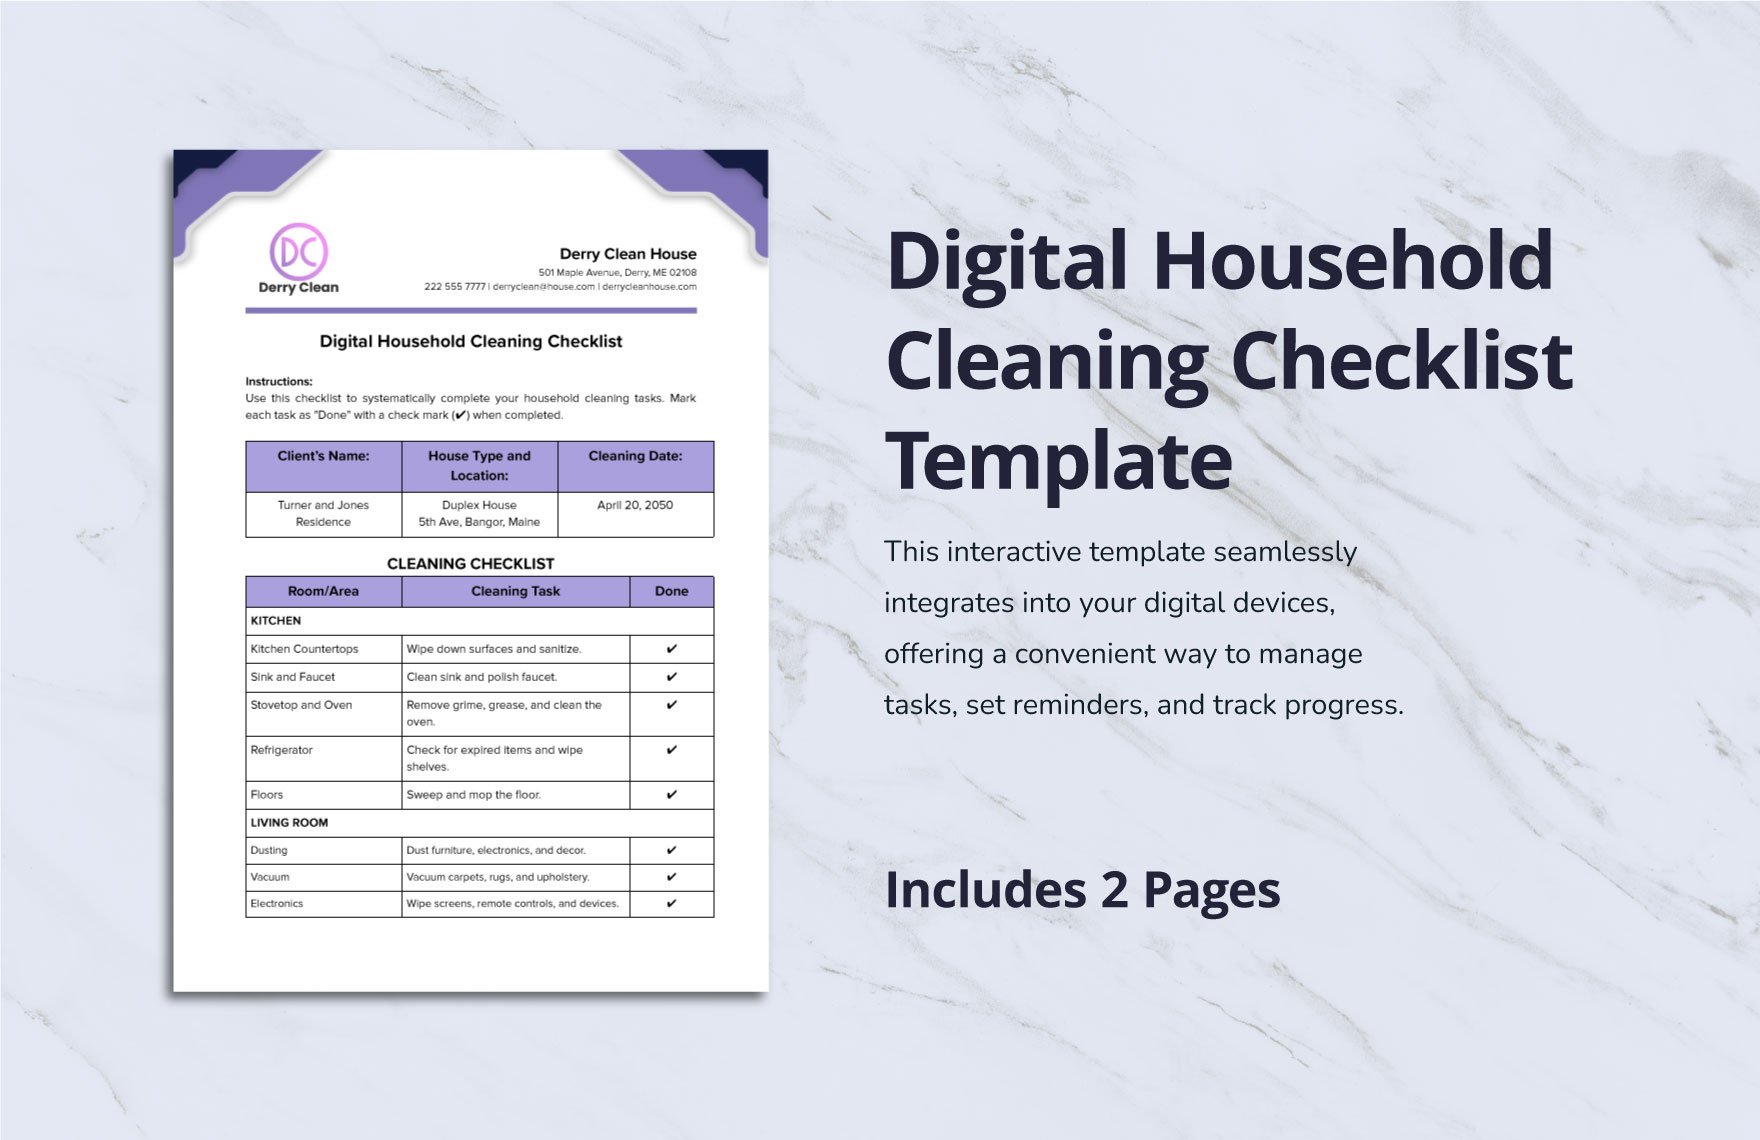 Digital Household Cleaning Checklist Template